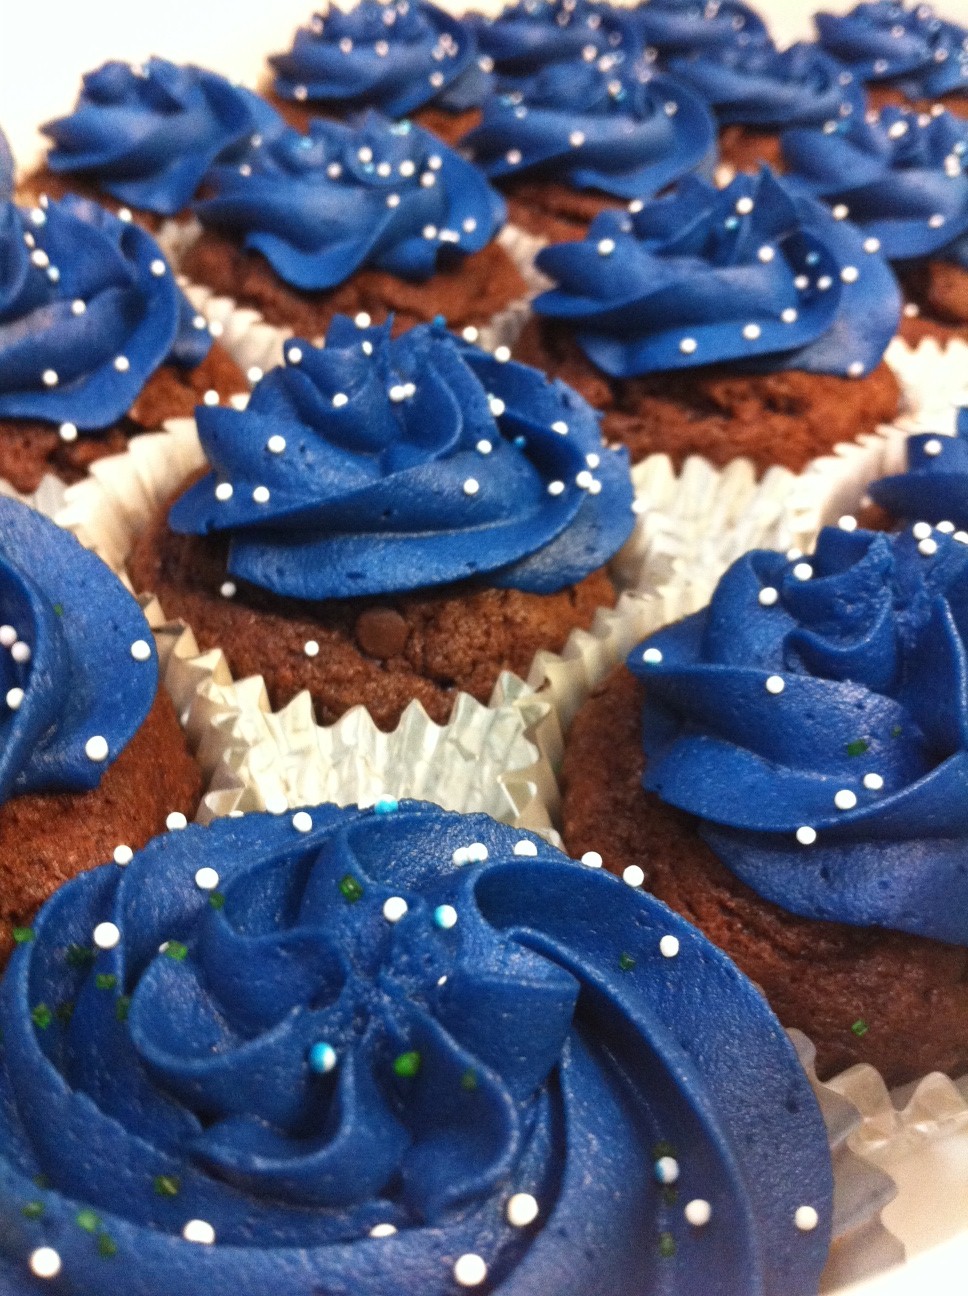 Blue Cupcakes with Chocolate Frosting